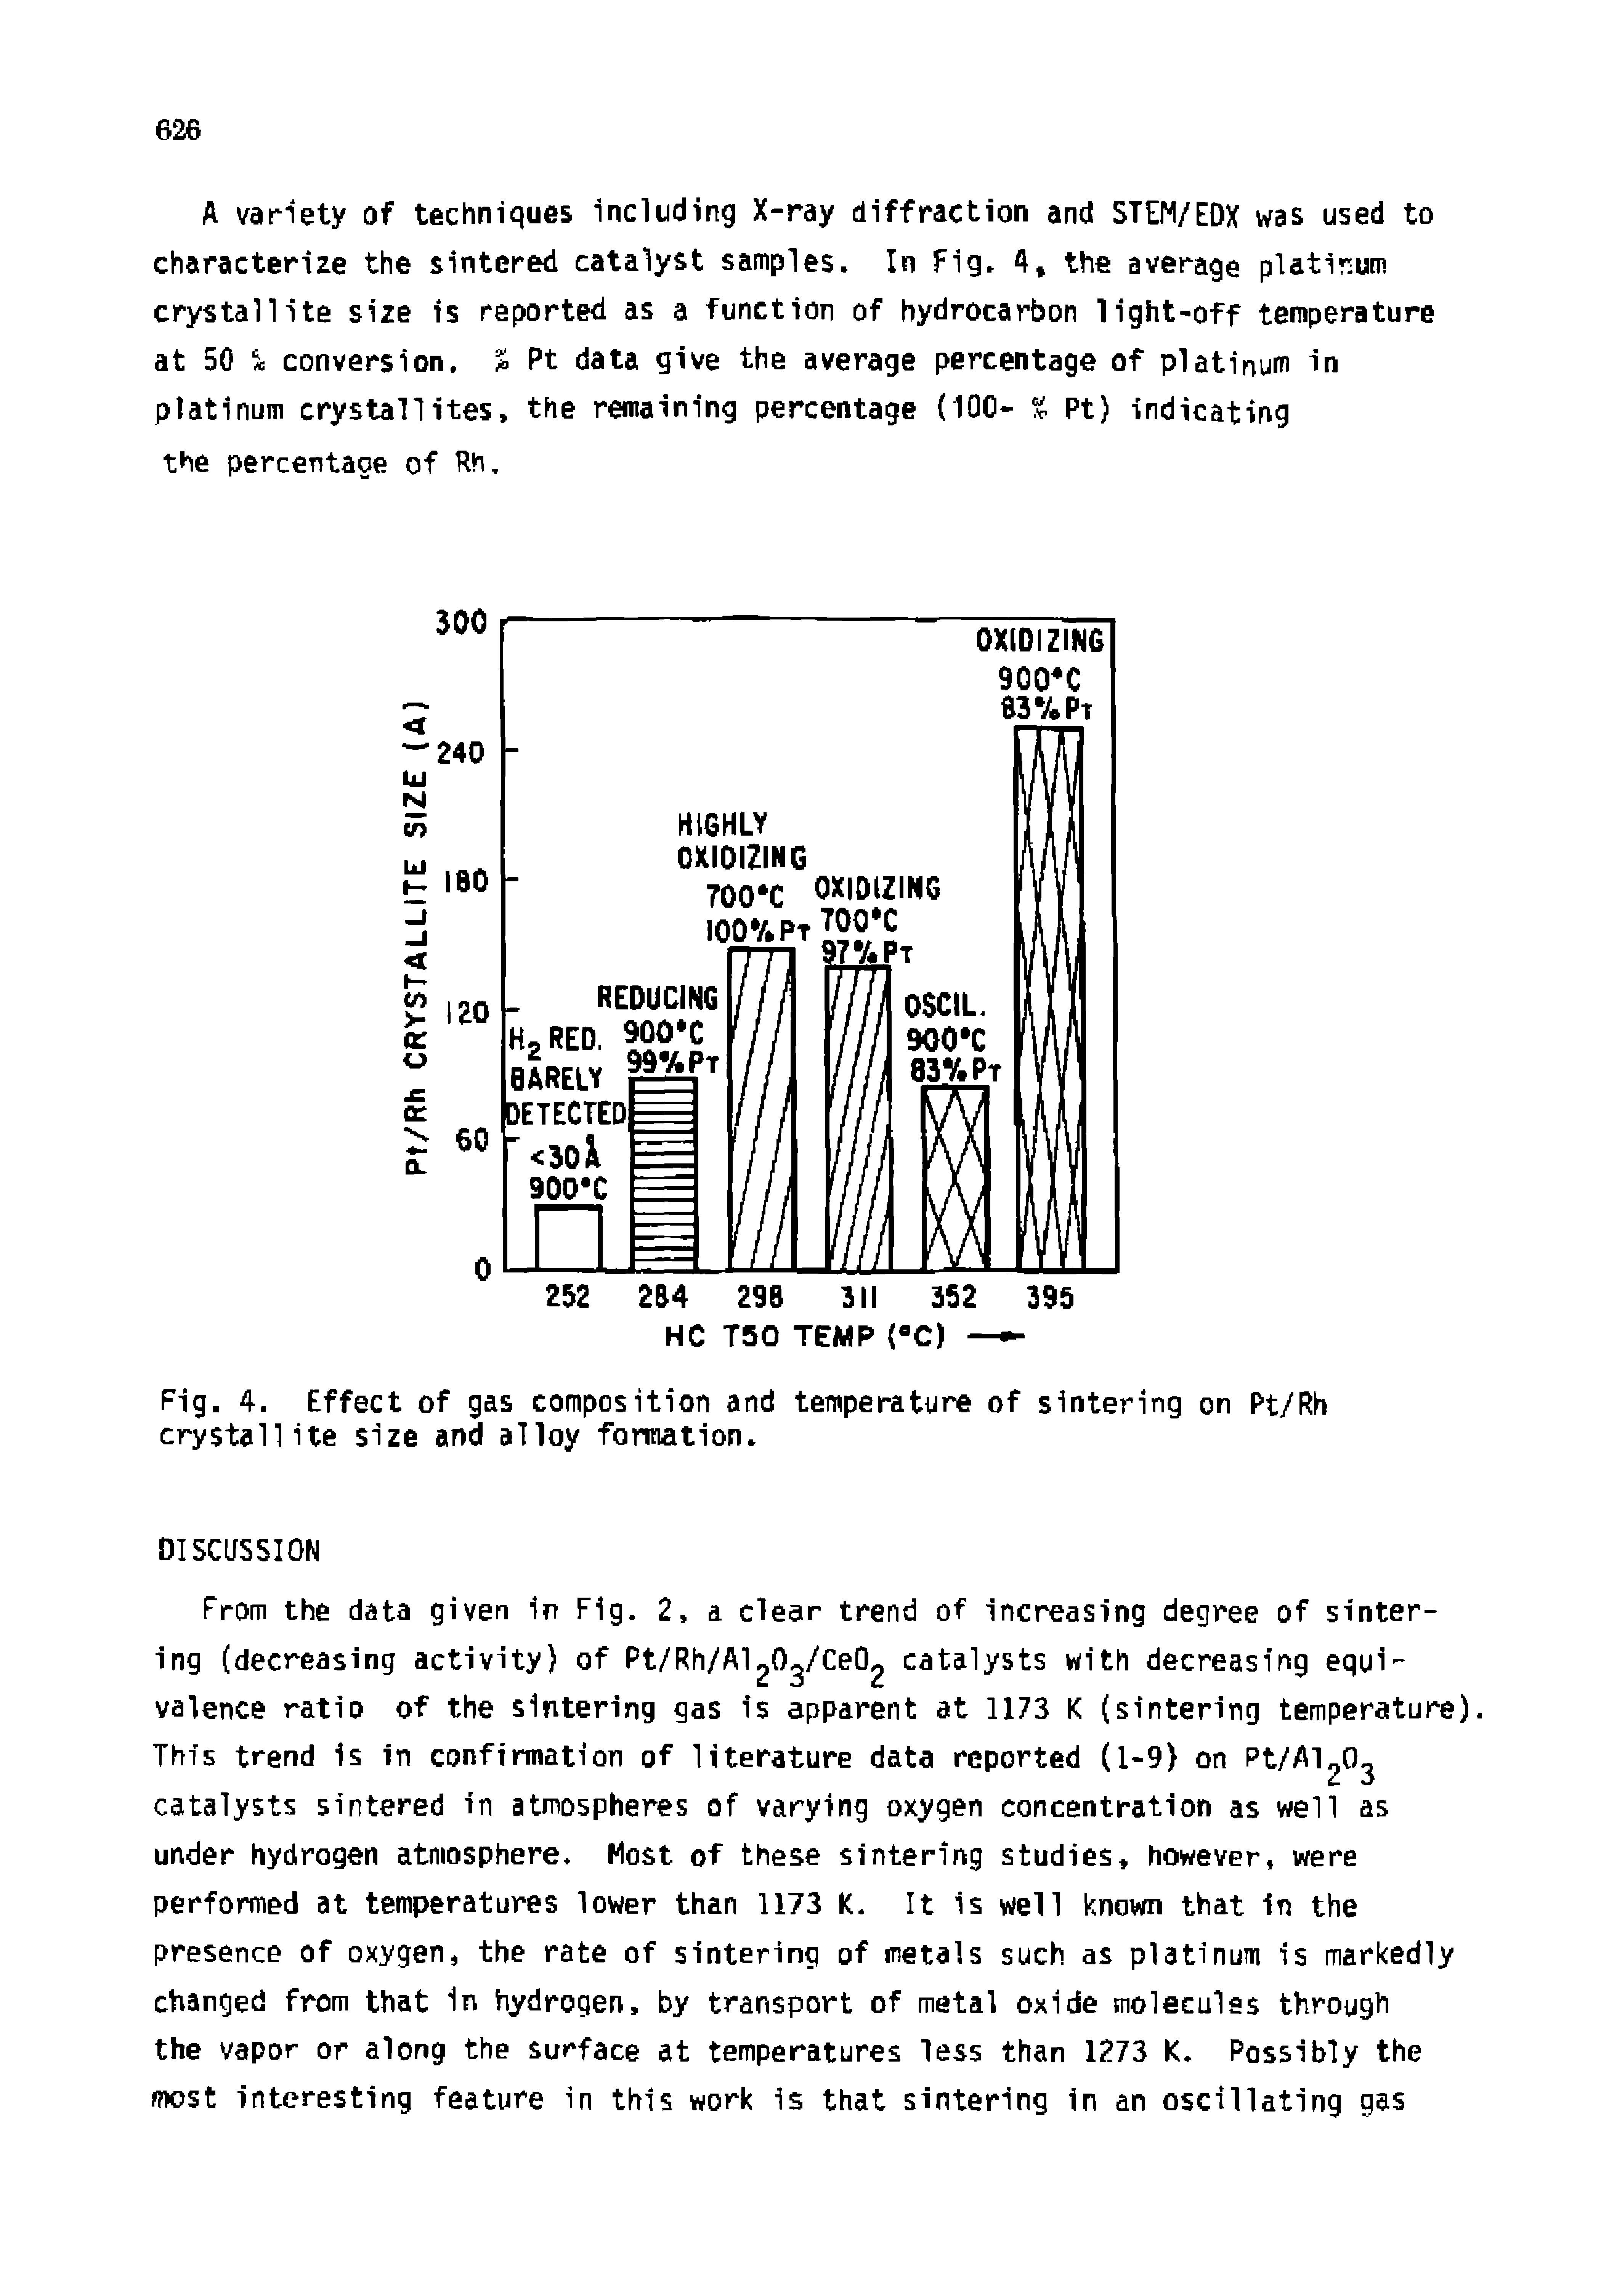 Fig. 4. Effect of gas composition and temperature of sintering on Pt/Rh crystallite size and alloy formation.